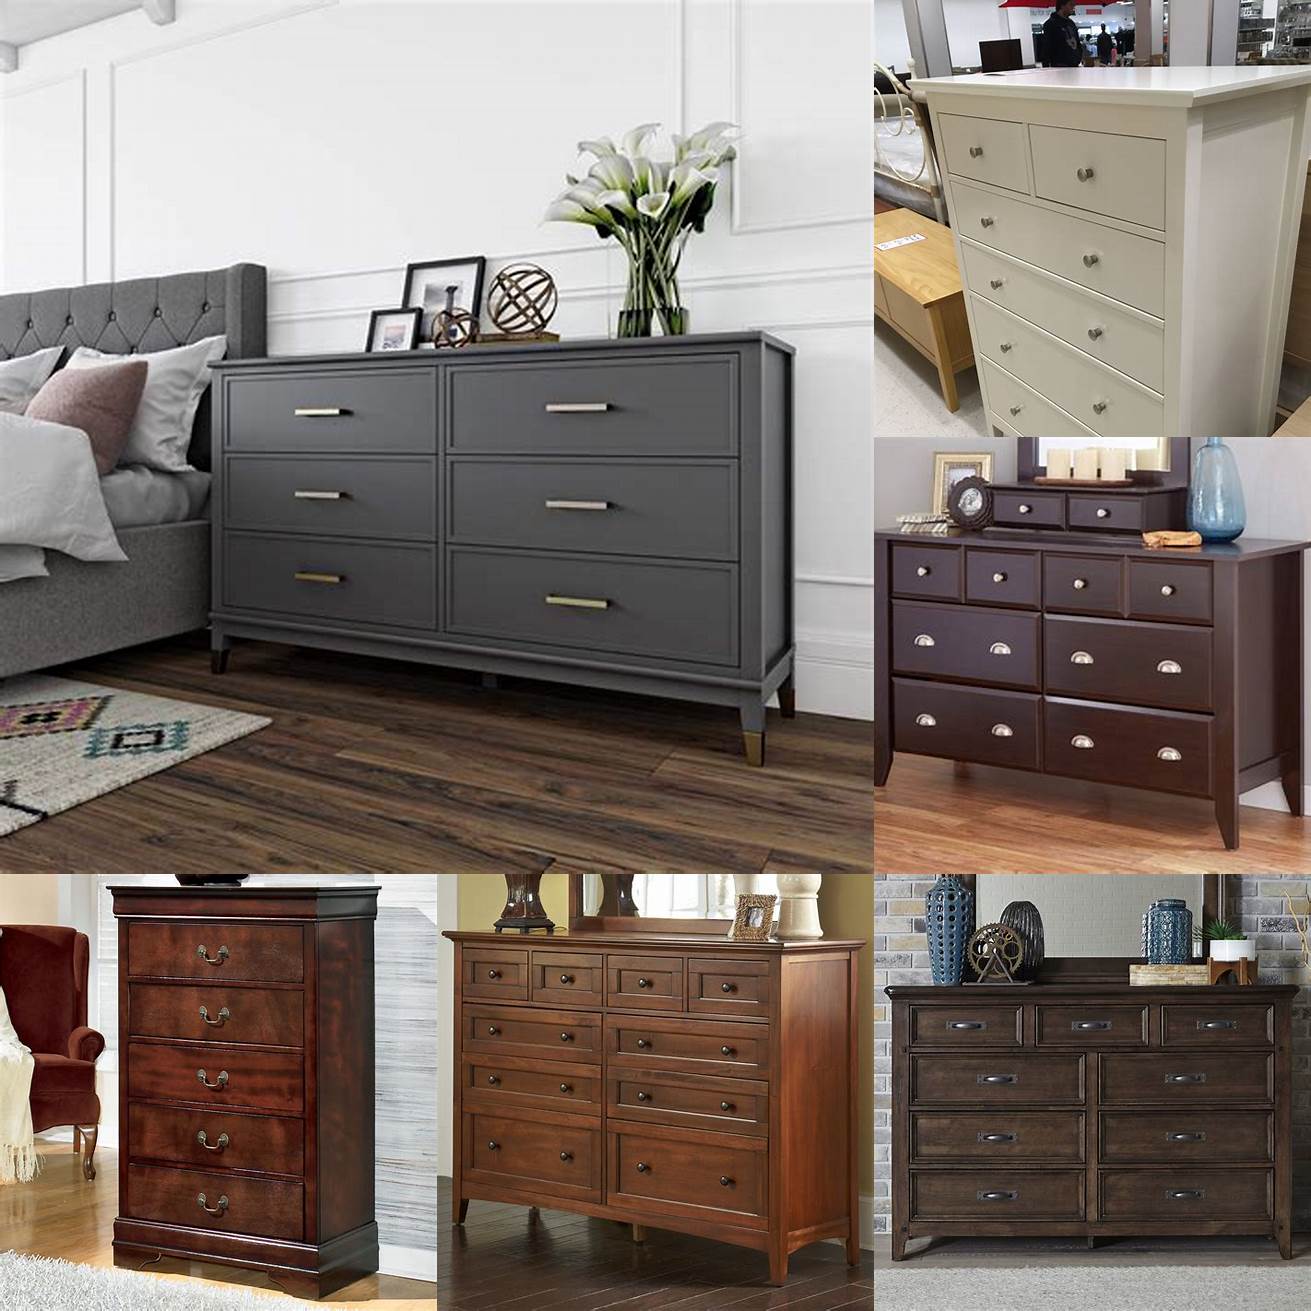 Dresser or Chest of Drawers